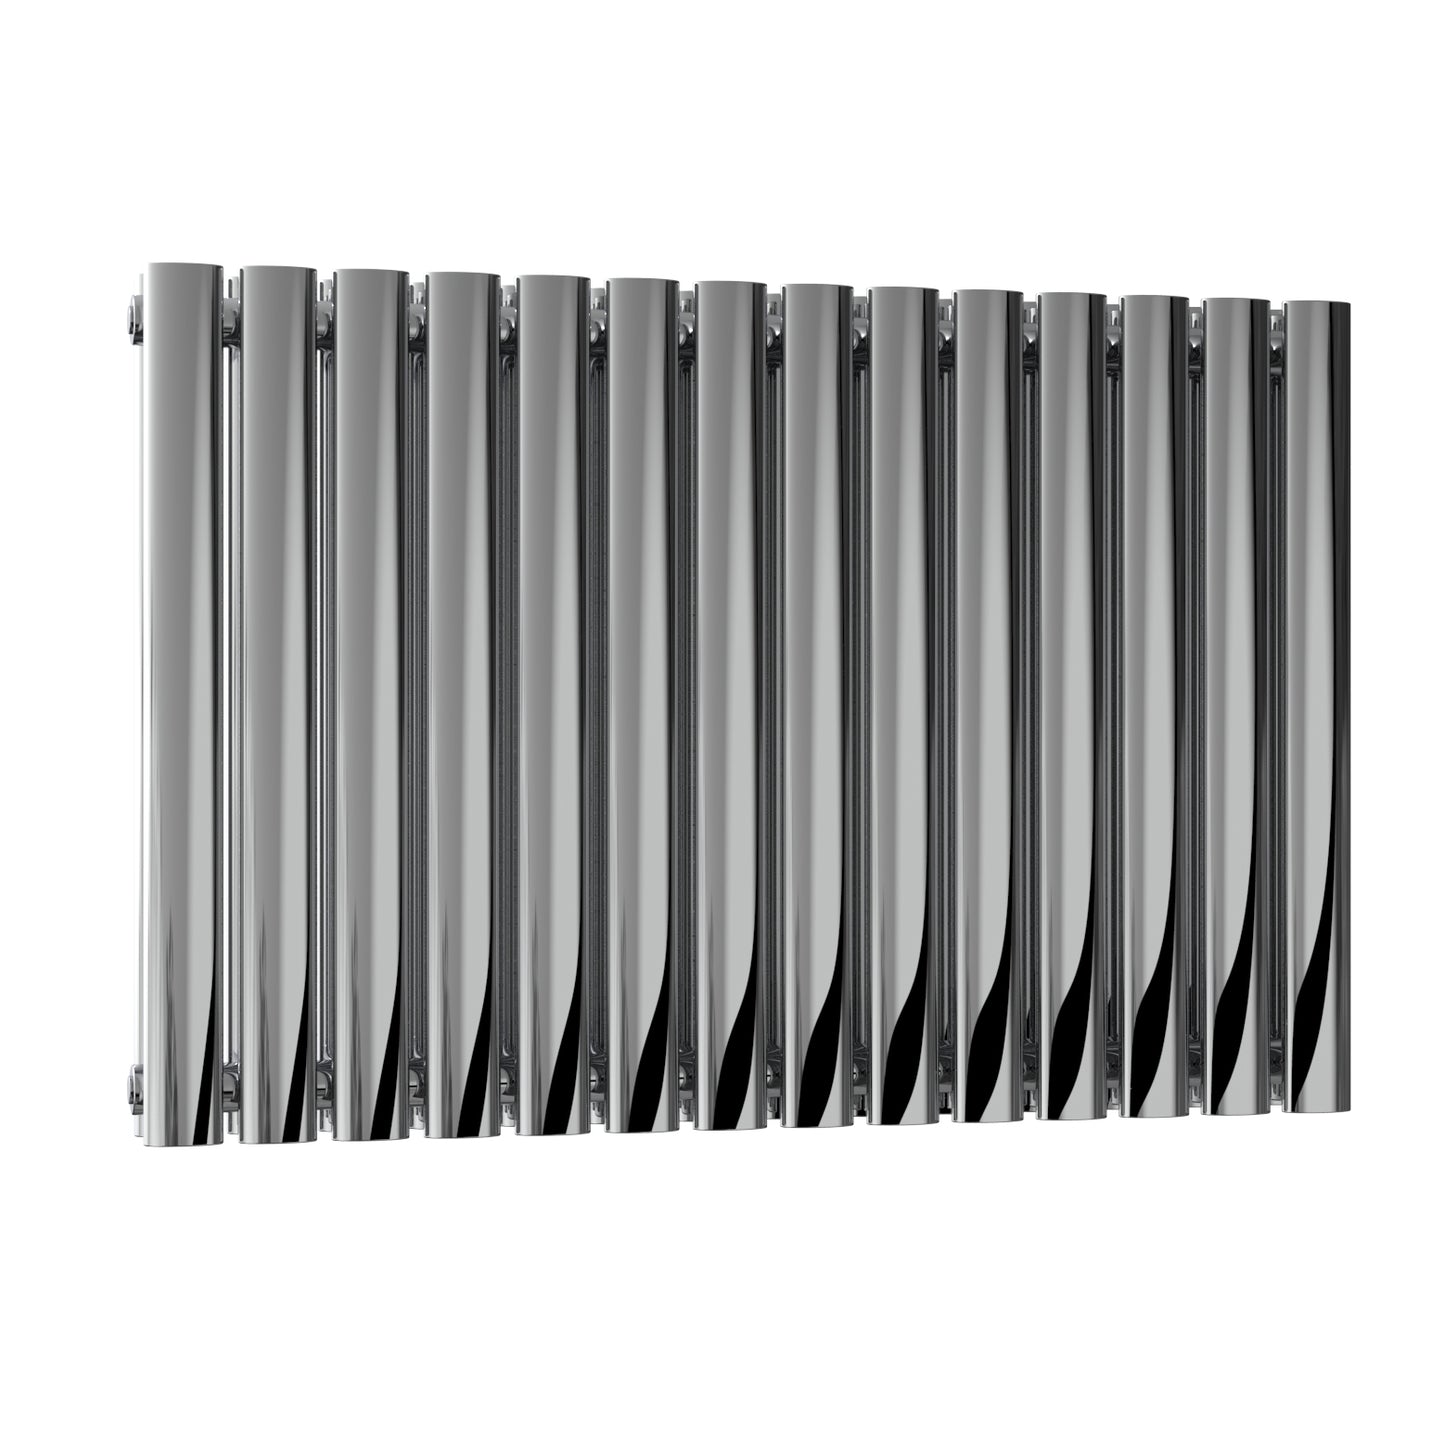 Nerox Horizontal Double Radiator - 600mm Tall - Polished Stainless Steel - Various Sizes